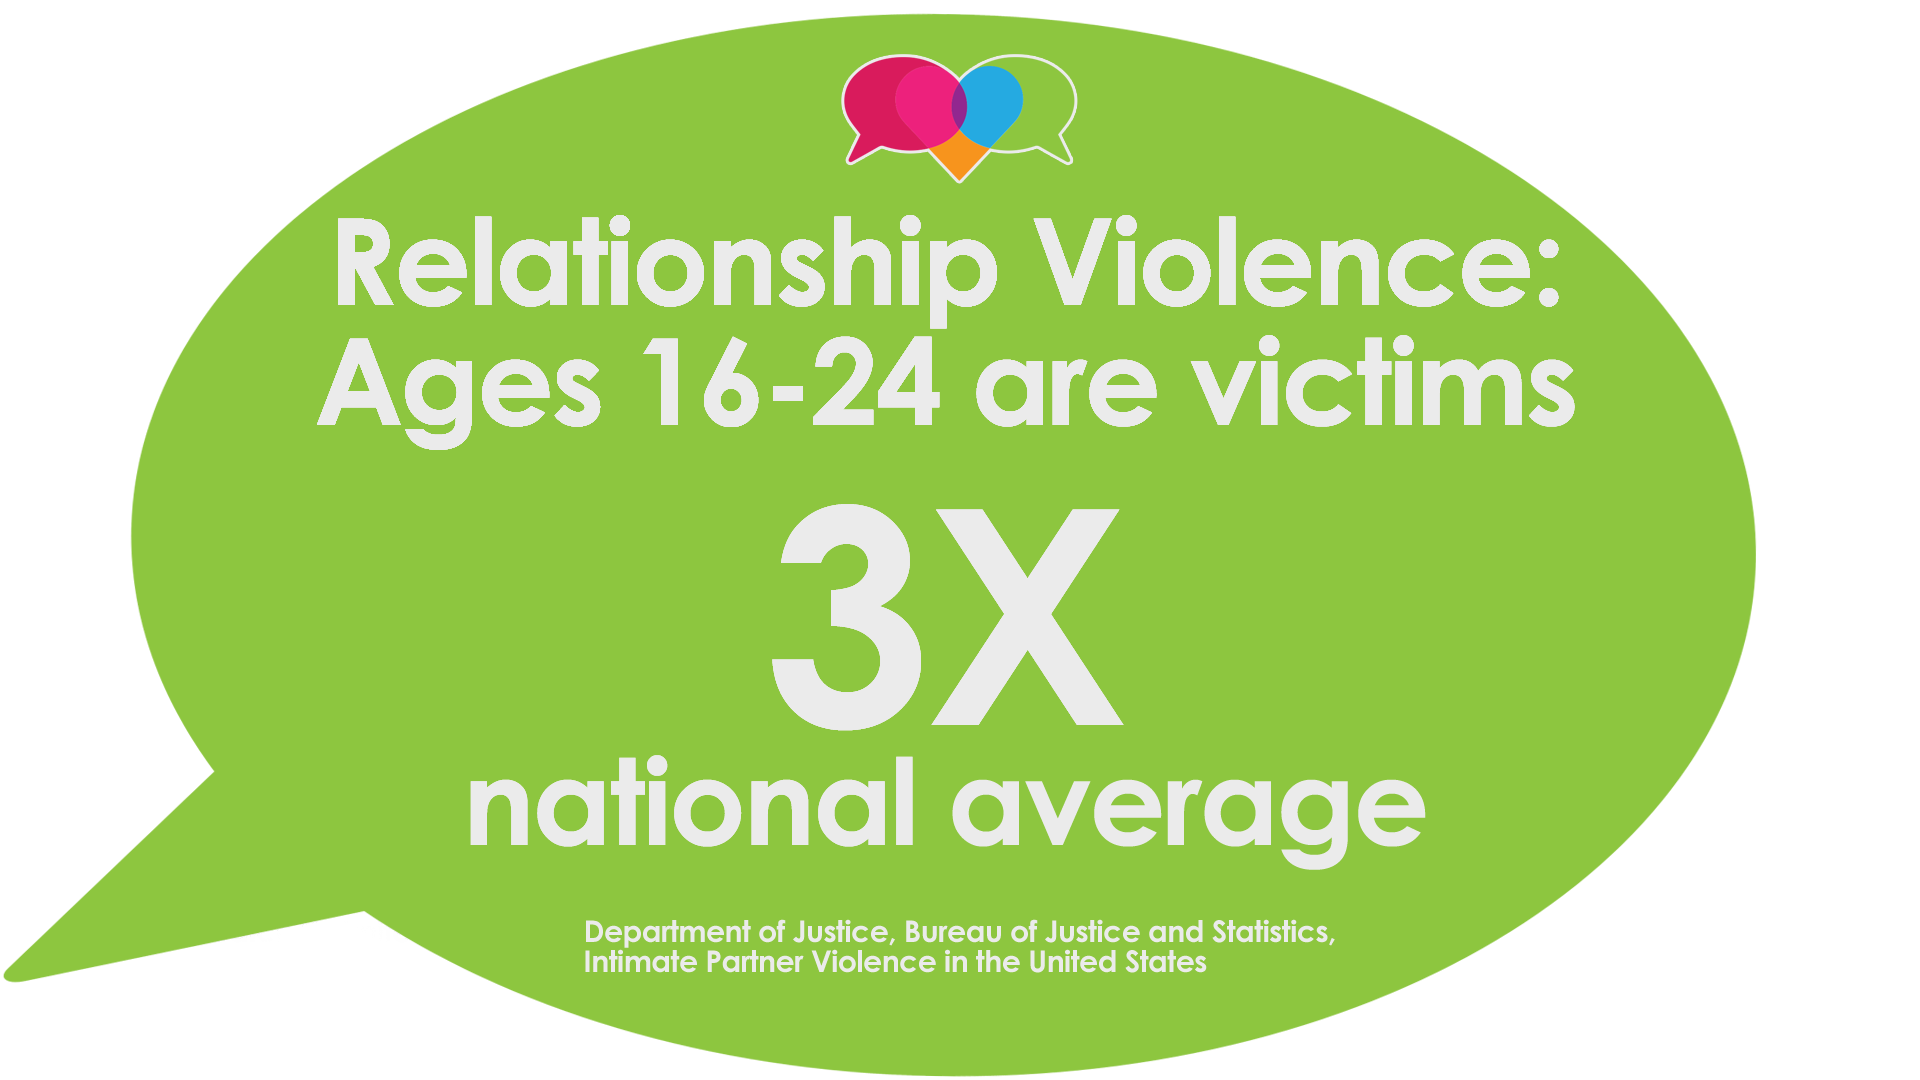 Relationship Violenece: Ages 16-24 are victims 3 times the national average